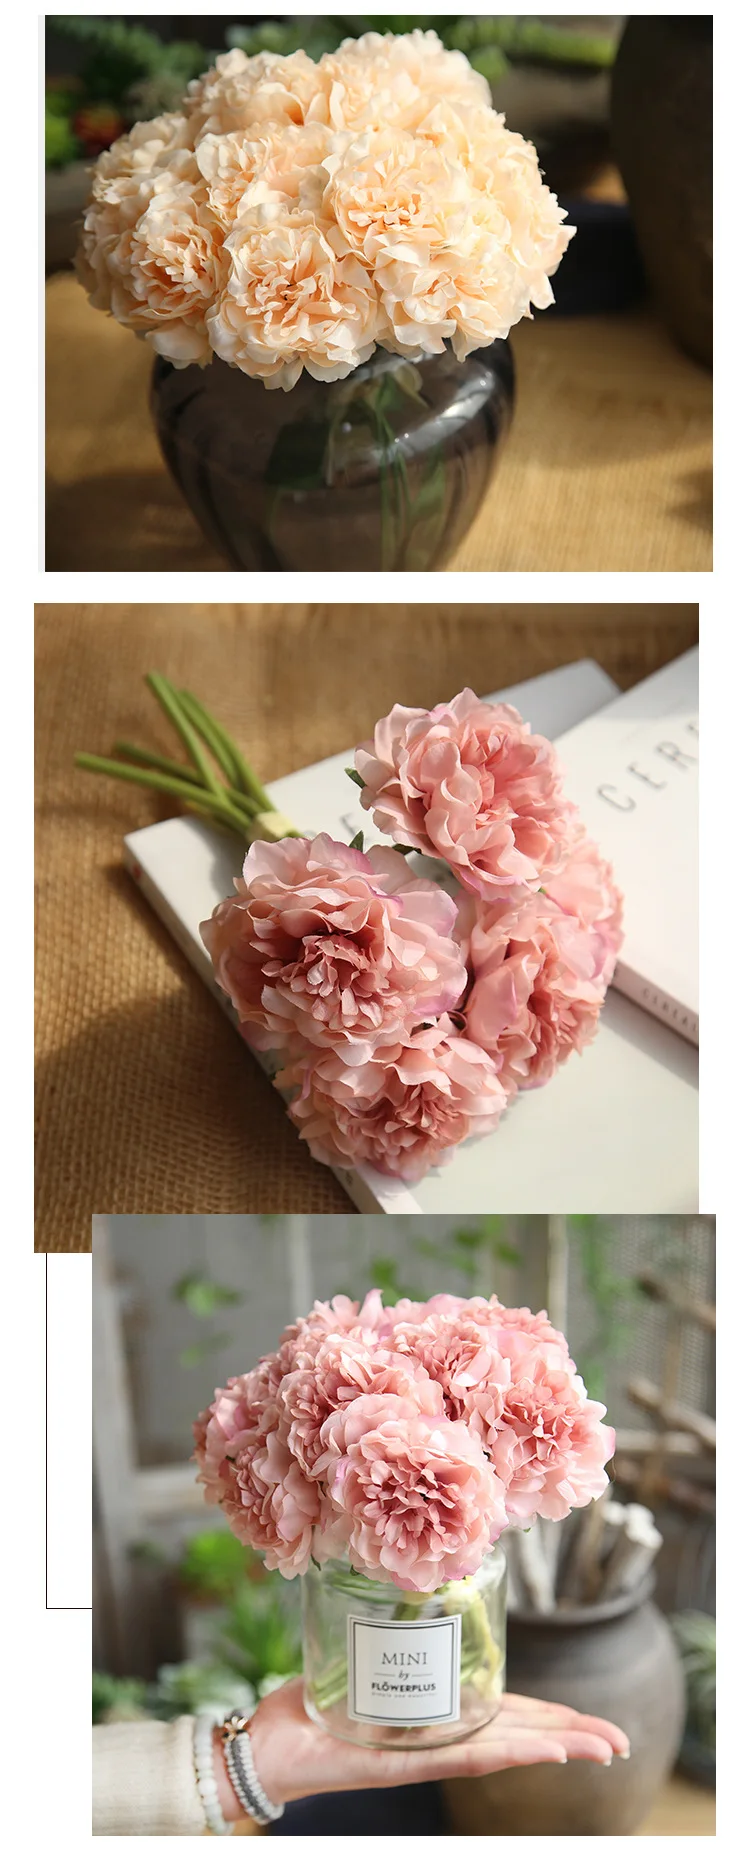 Artificial Flowers Silk Peony for Home Wedding Decoration 5 Heads Hydrangea Small Bouquet Fall Decor Fake Flowers